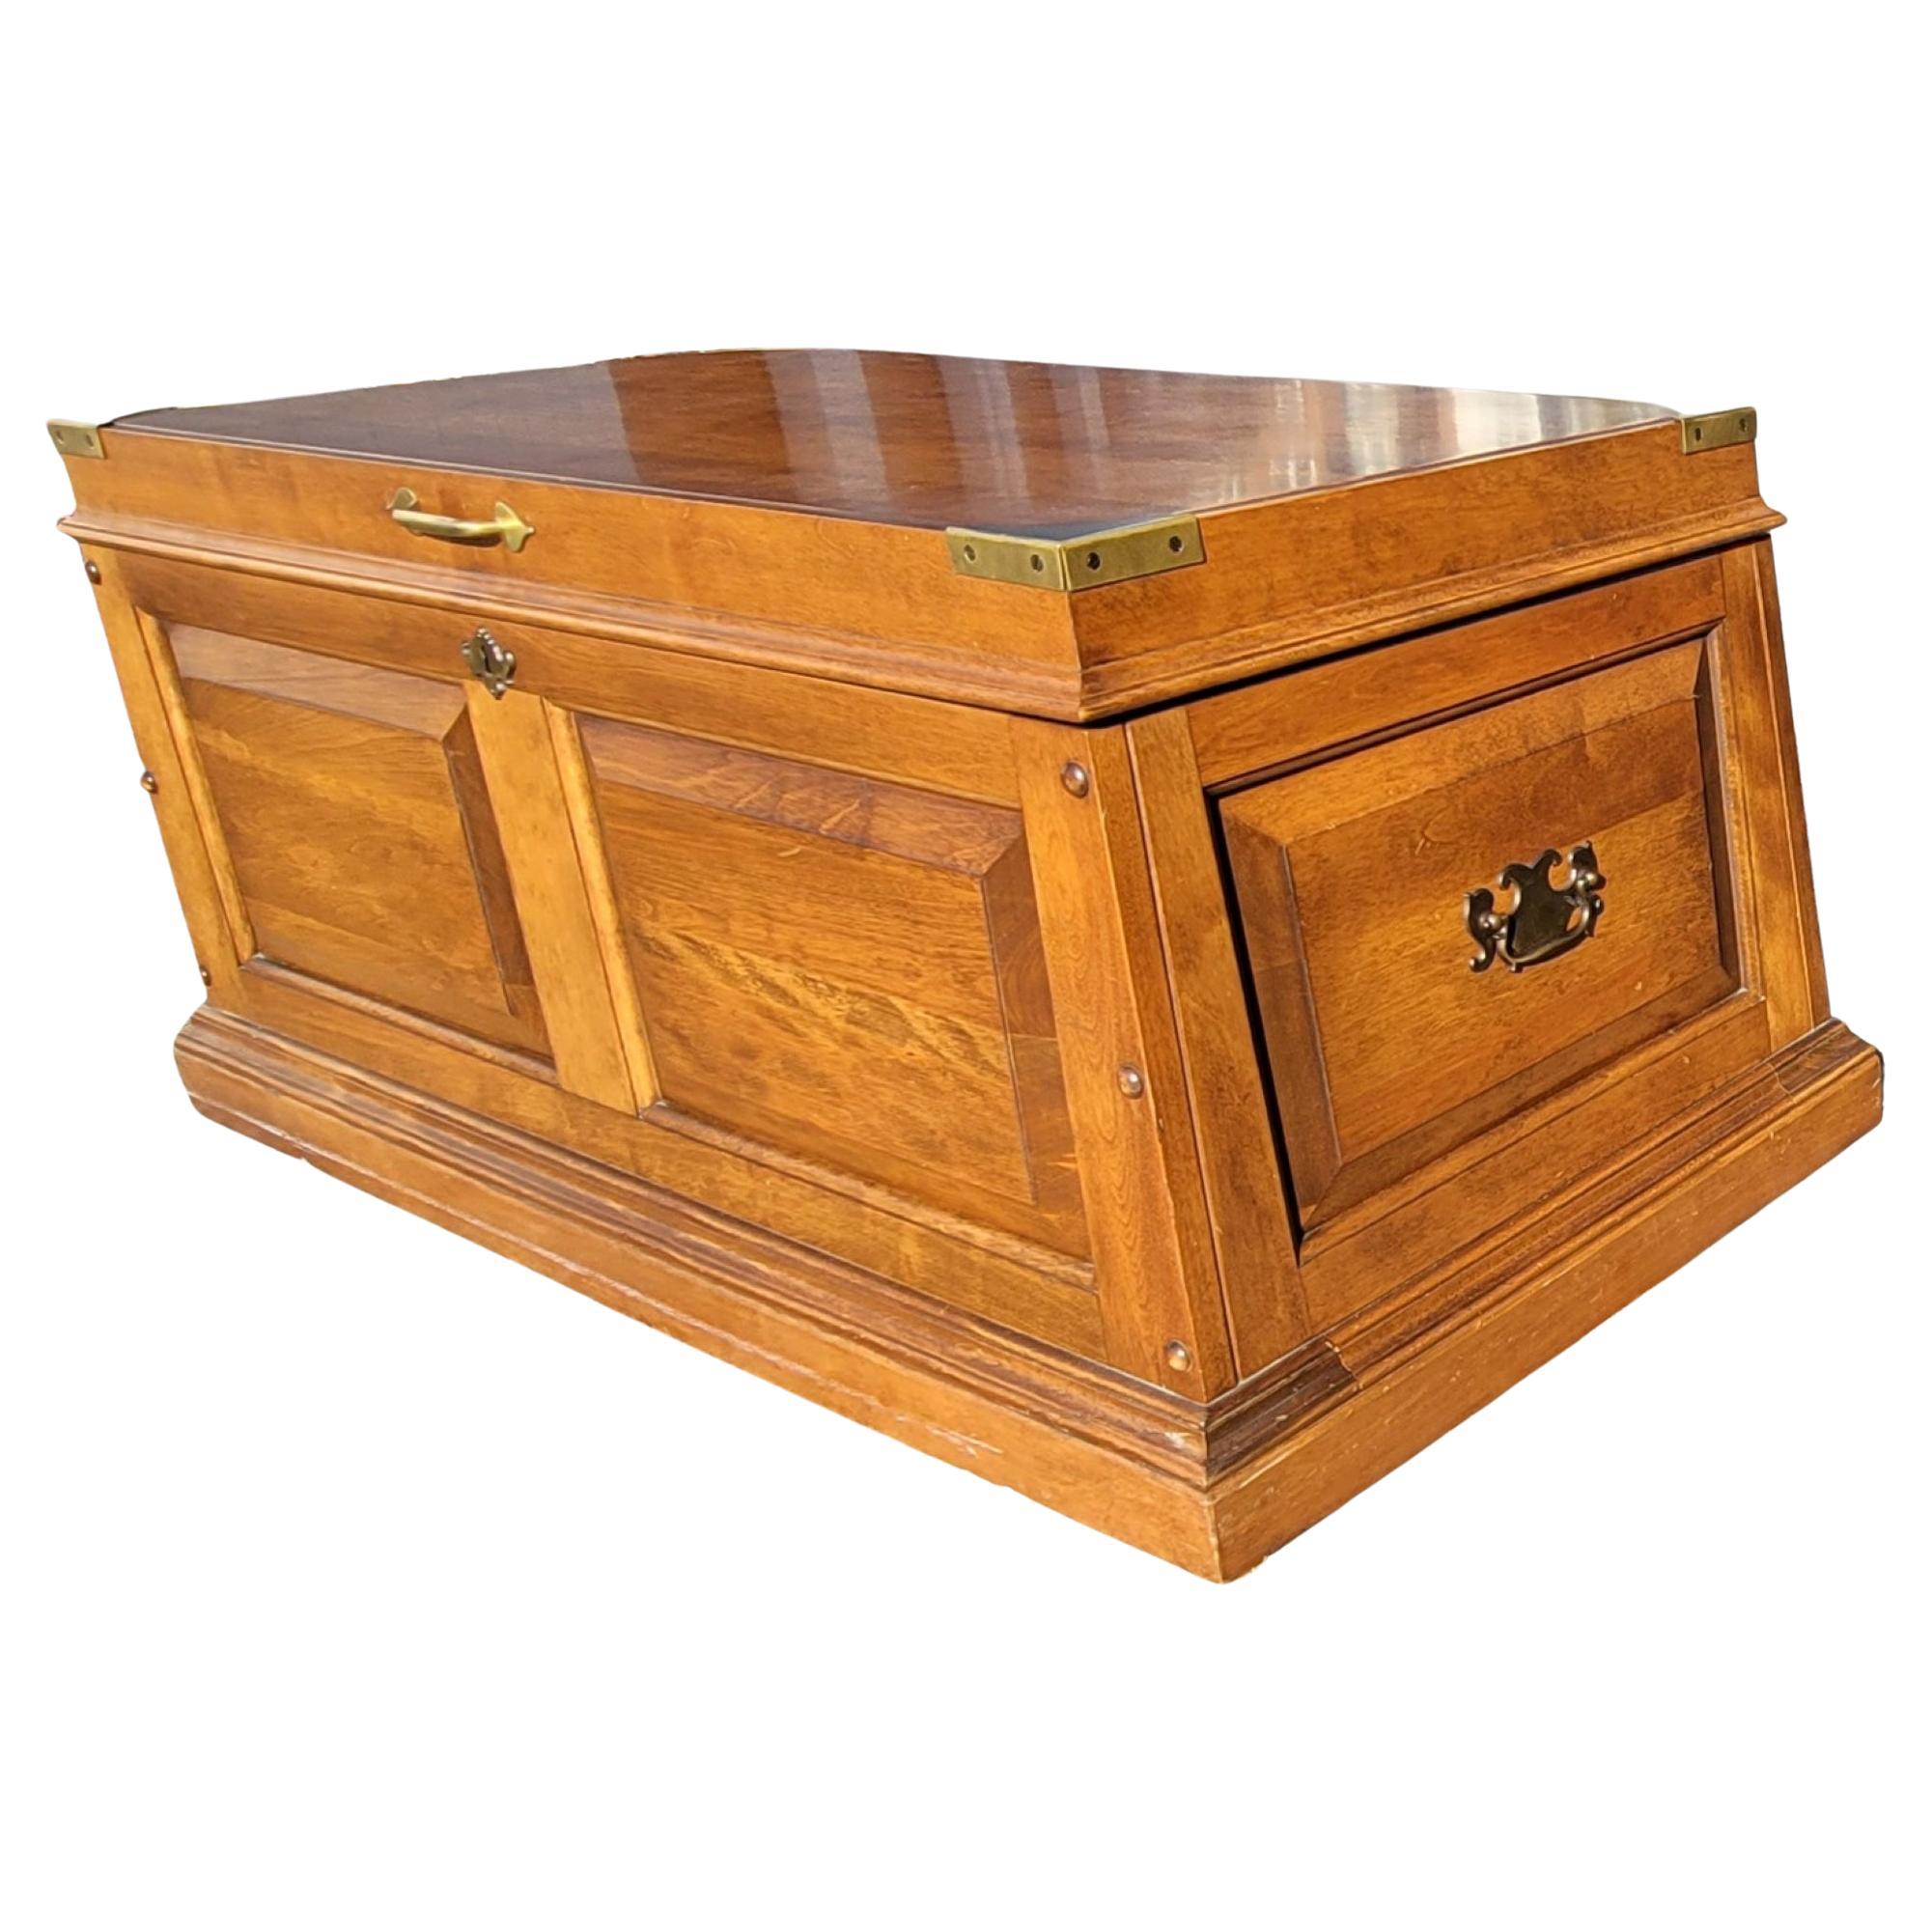 A very well kept 1972 Pennsylvania House campaign style coffee table with Storage Chest in Solid Cherry throughout and panelized sides. Excellent condition with virtually no scratches. Dovetail joints and both brass handles and brass fittings in